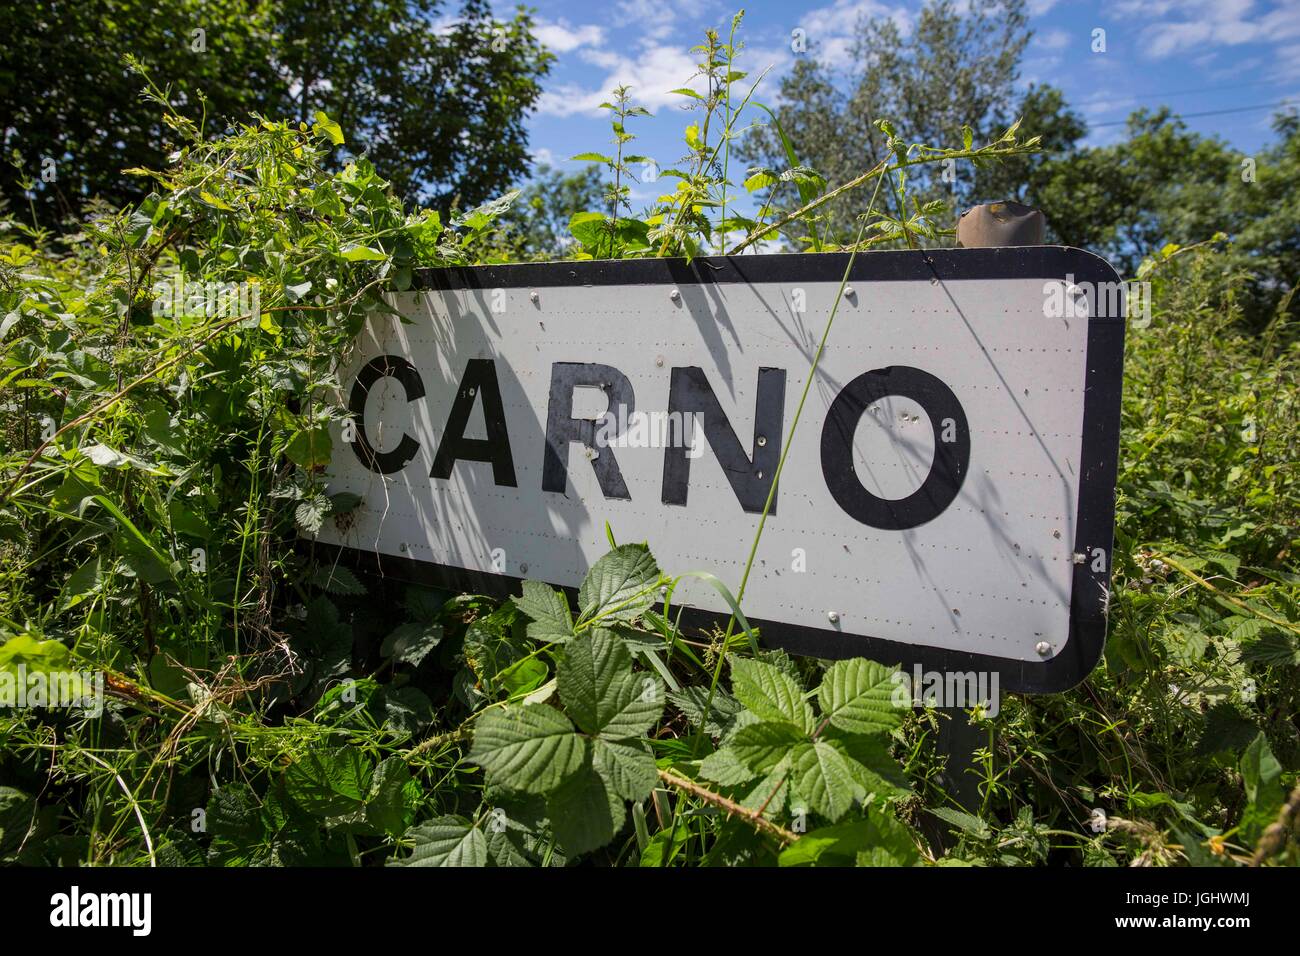 A partially obscured sign-post for the Welsh village of Carno, Powys, Wales, UK. A major stash of LSD is rumoured to be buried in nearby woodland. Stock Photo